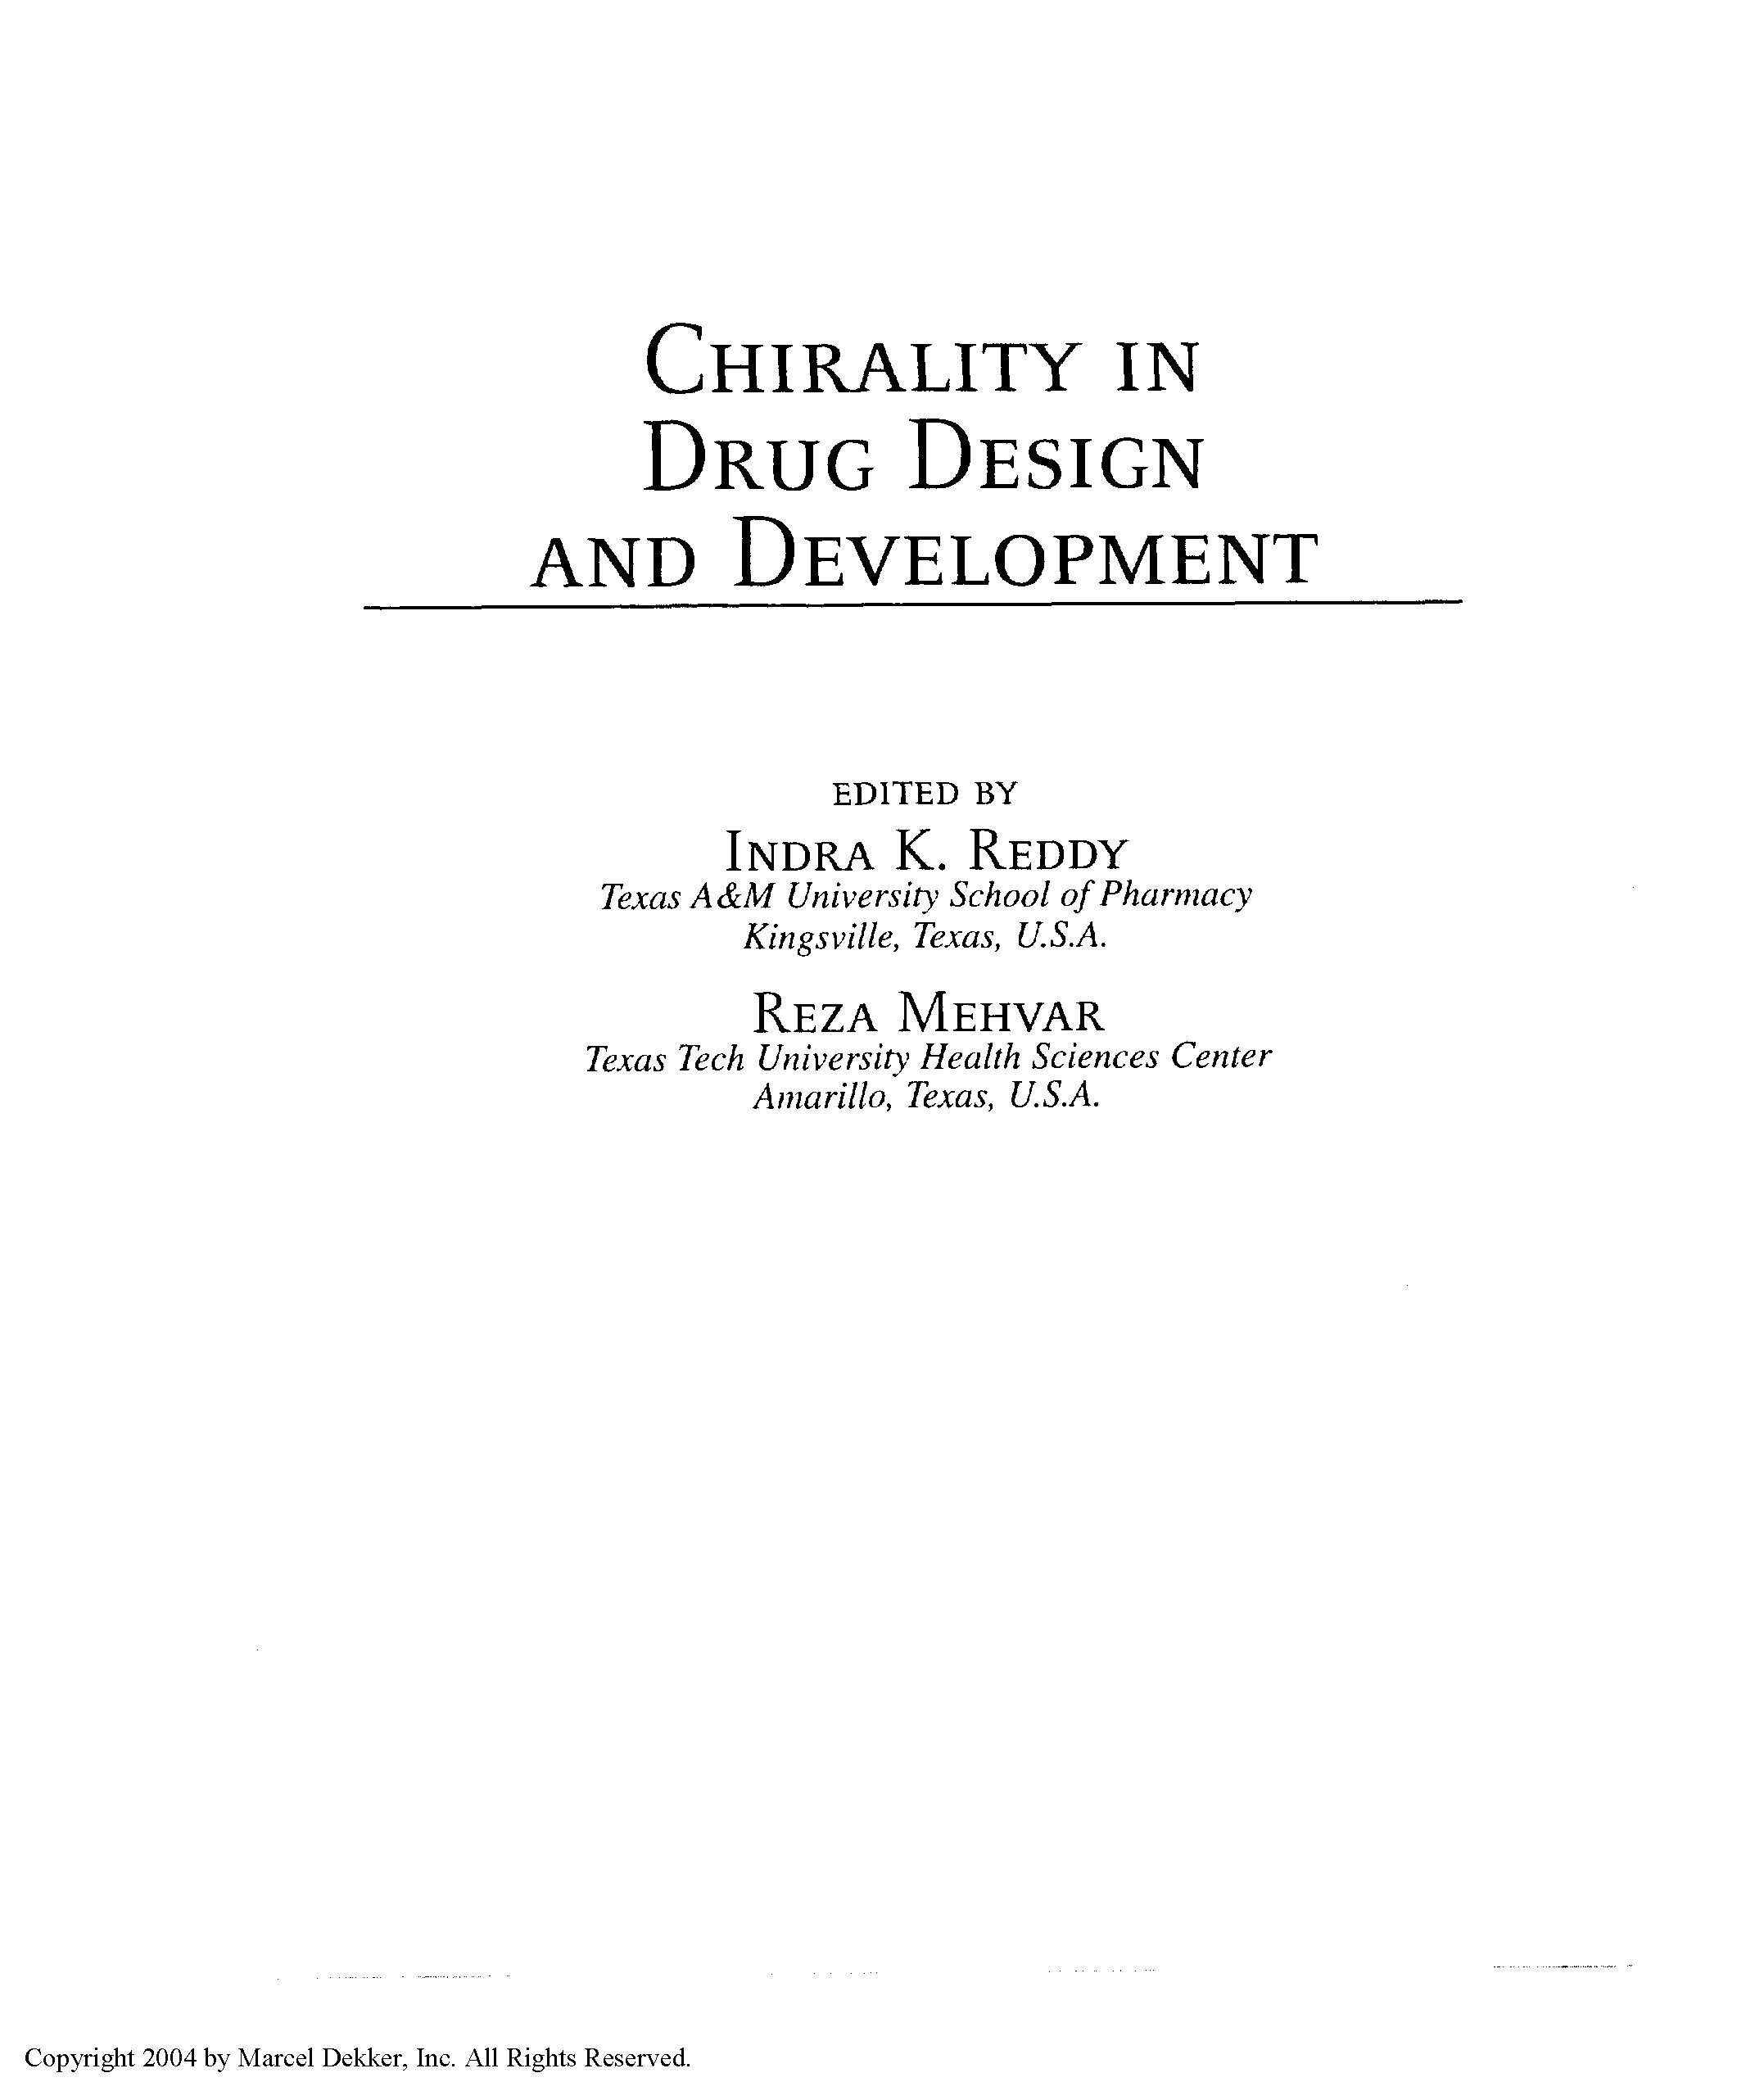 CHIRALITY IN DRUG DESIGN AND DEVELOPMRNT